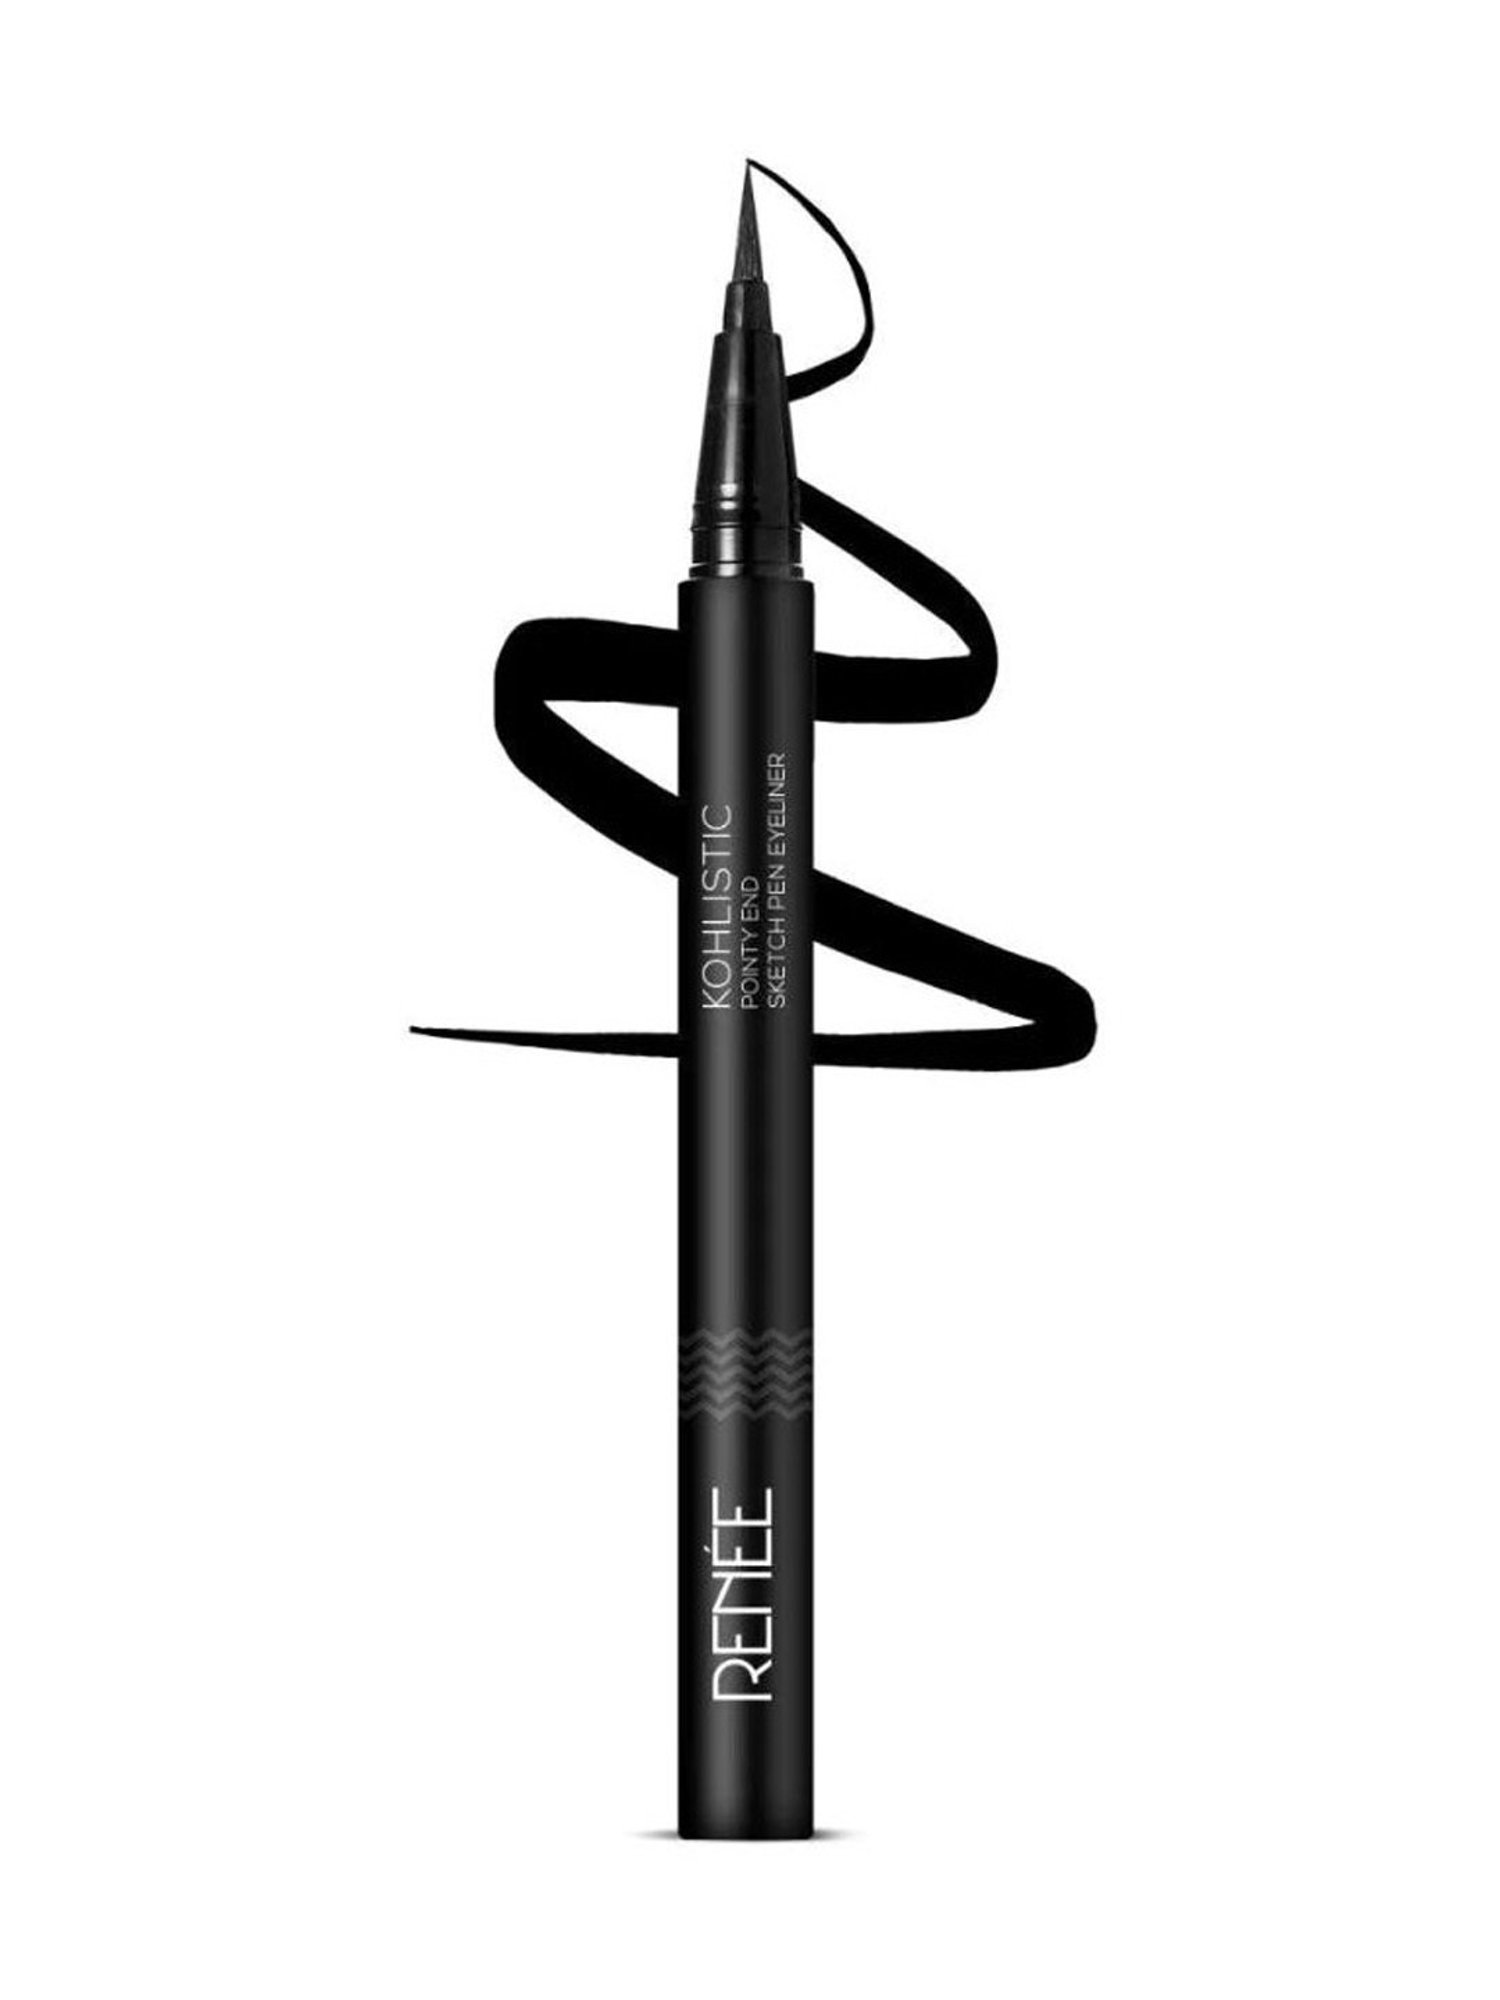 Buy Insight Sketch Pen Eyeliner 15gm Black Online at Low Prices in India   Amazonin